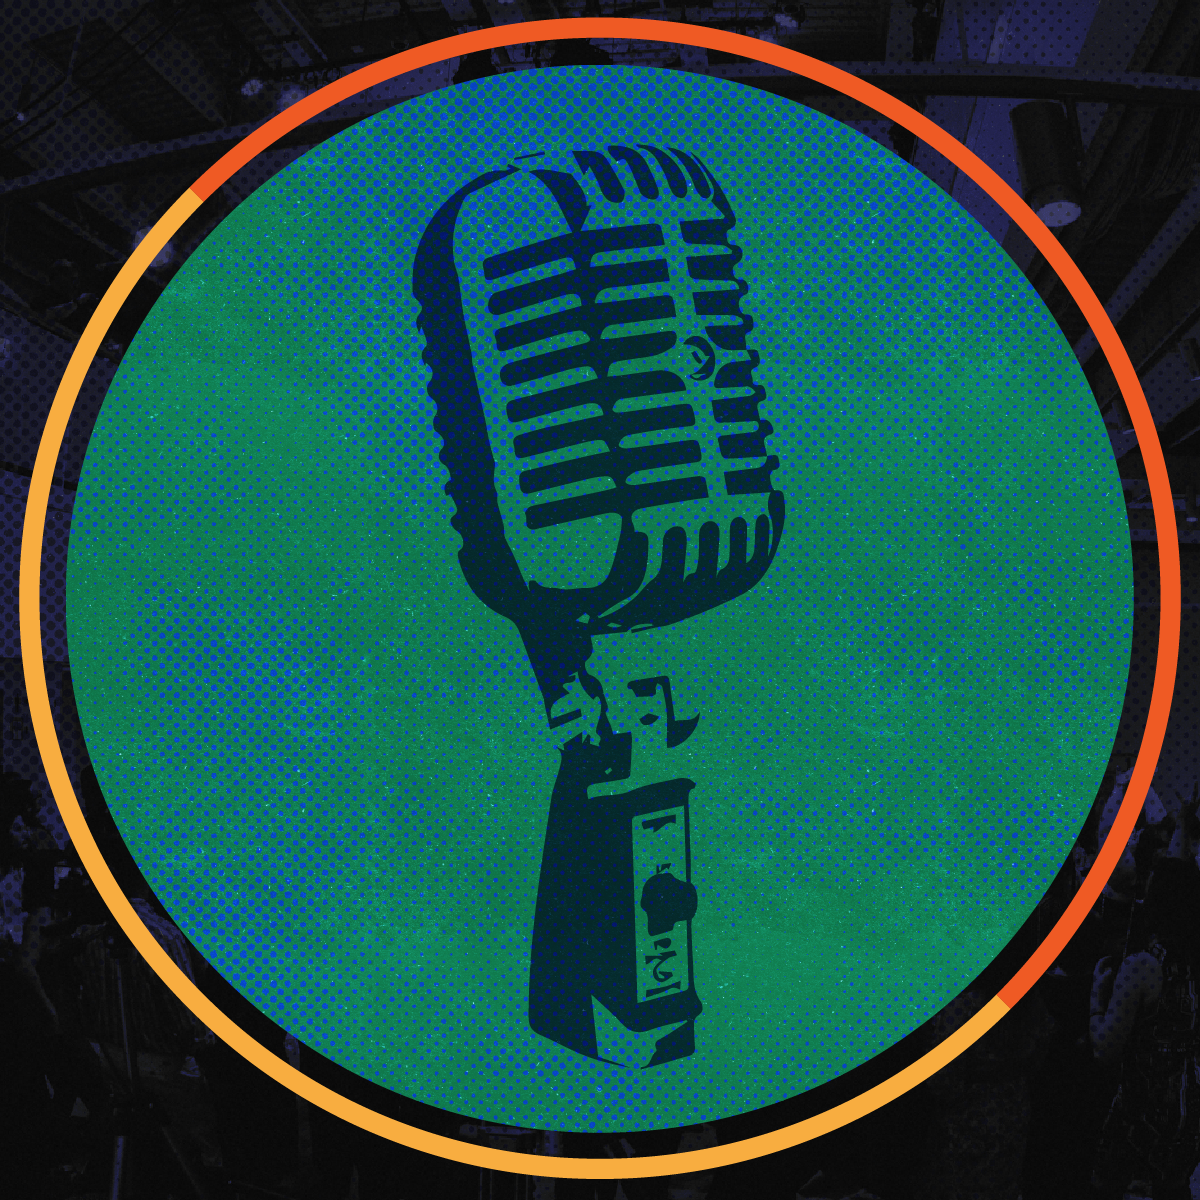 microphone graphic on blue green background